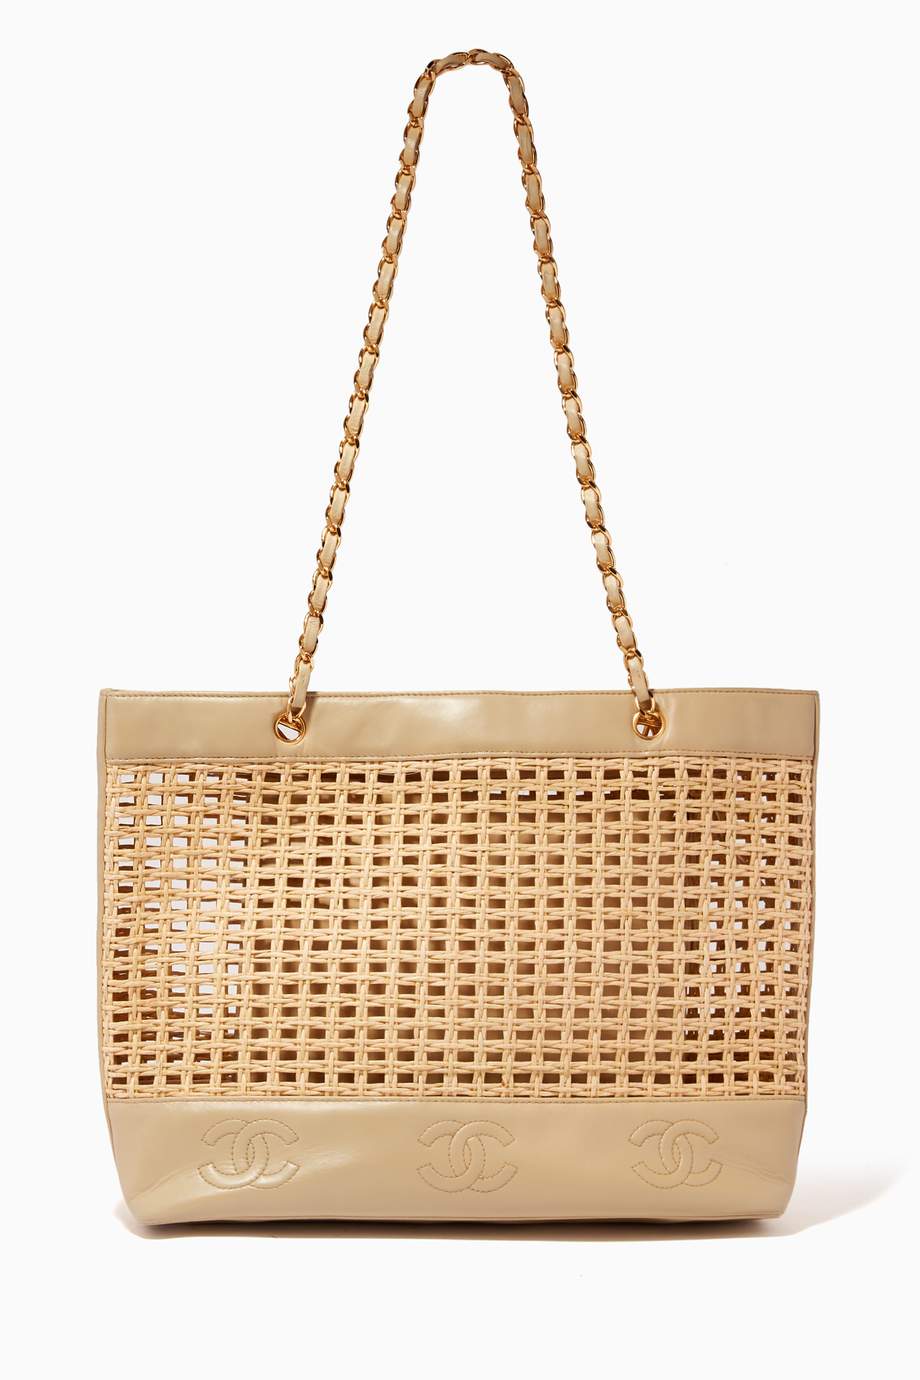 Shop Chanel Vintage Gold Triple CC Tote Bag in Lambskin & Straw for Women | Ounass UAE